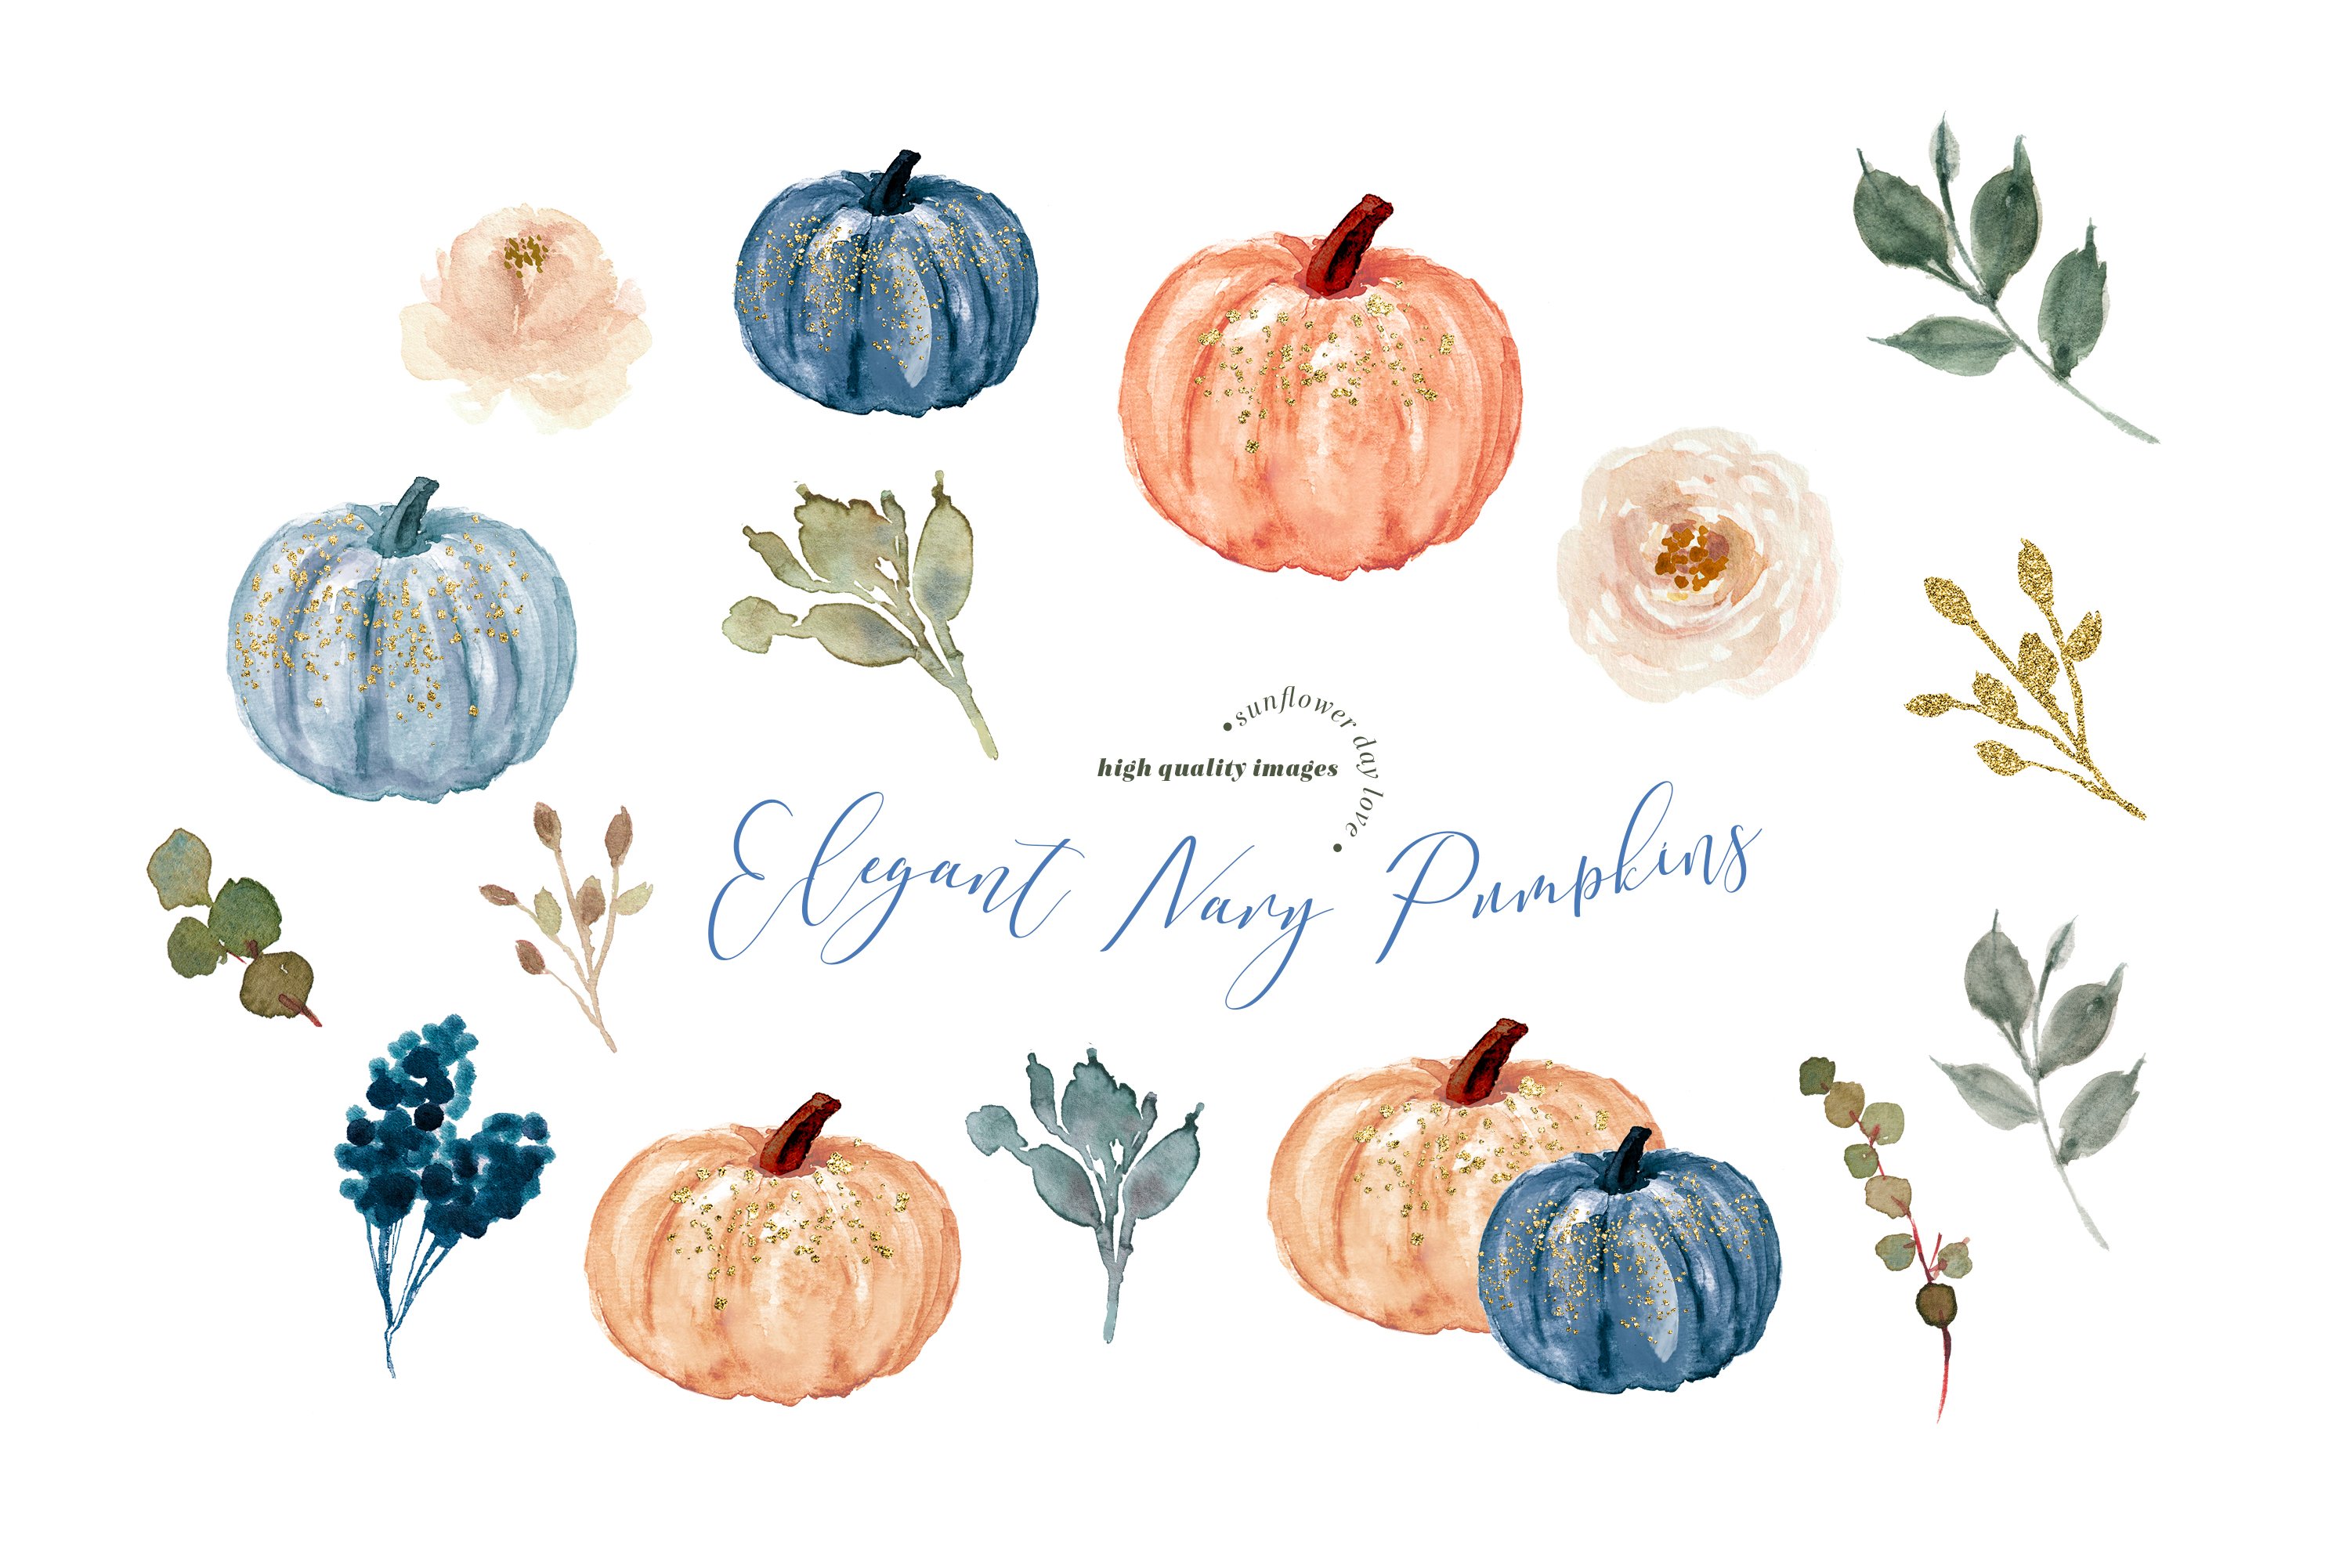 Diverse of pumpkins in a watercolor style.